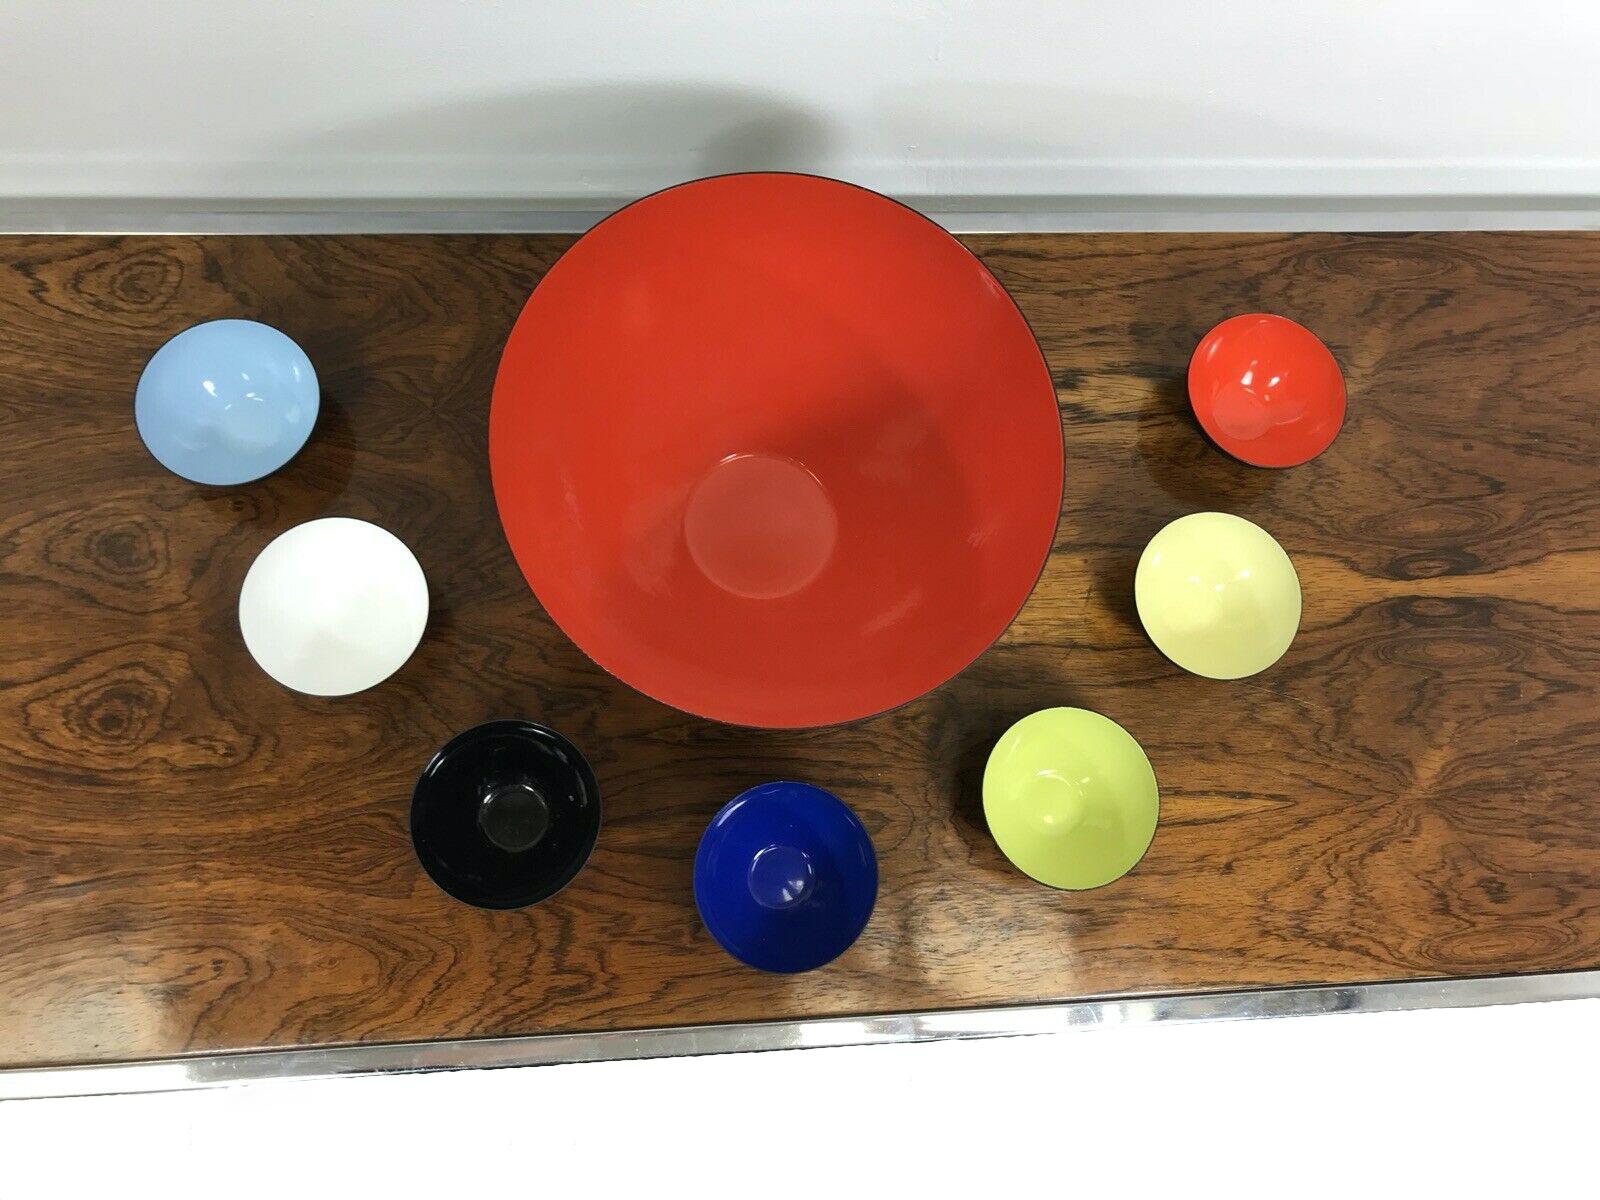 Rare set of vintage Danish Krenit Bowls designed by Normann Copenhagen. Era 1960s.

Consisting of a black metal exterior and a bright colorful enamel interior

The Colors are reflective of the artists Mondrian and Miro hugely influential artists